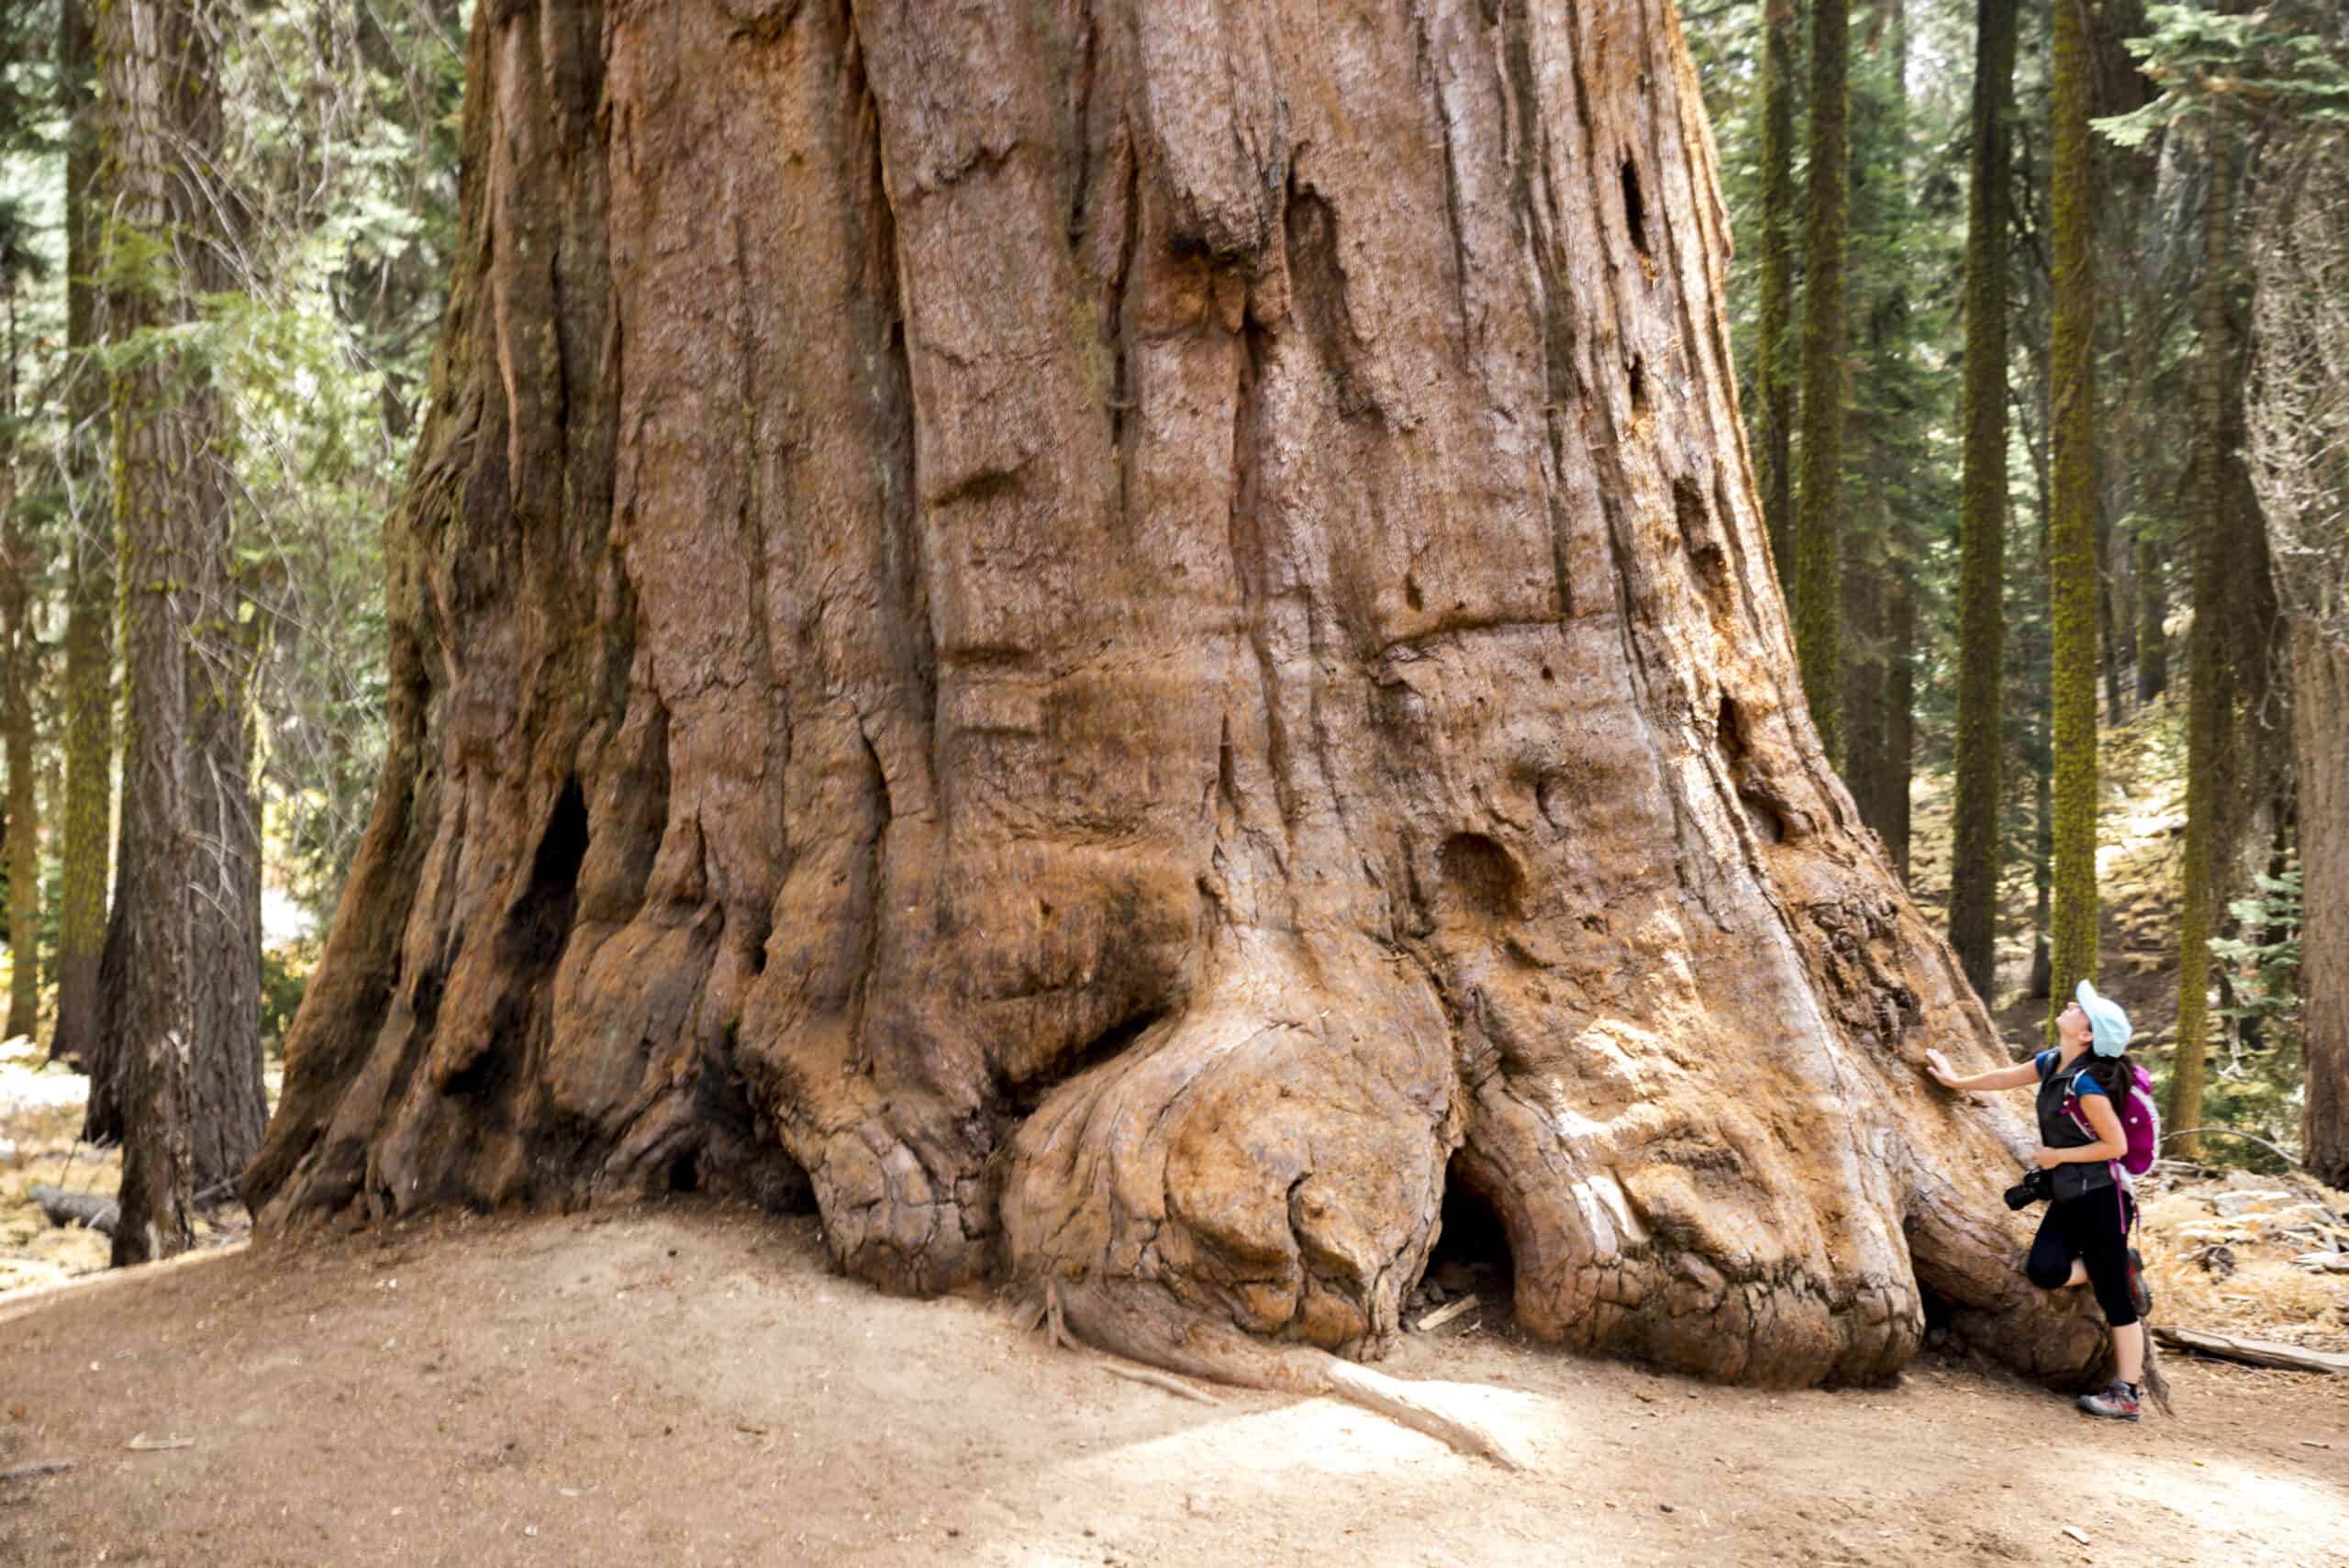 A person standing next to a giant sequoia tree, demonstrating how huge a sequoia trunk can grow to be. It's amazing our potential in the right environment.